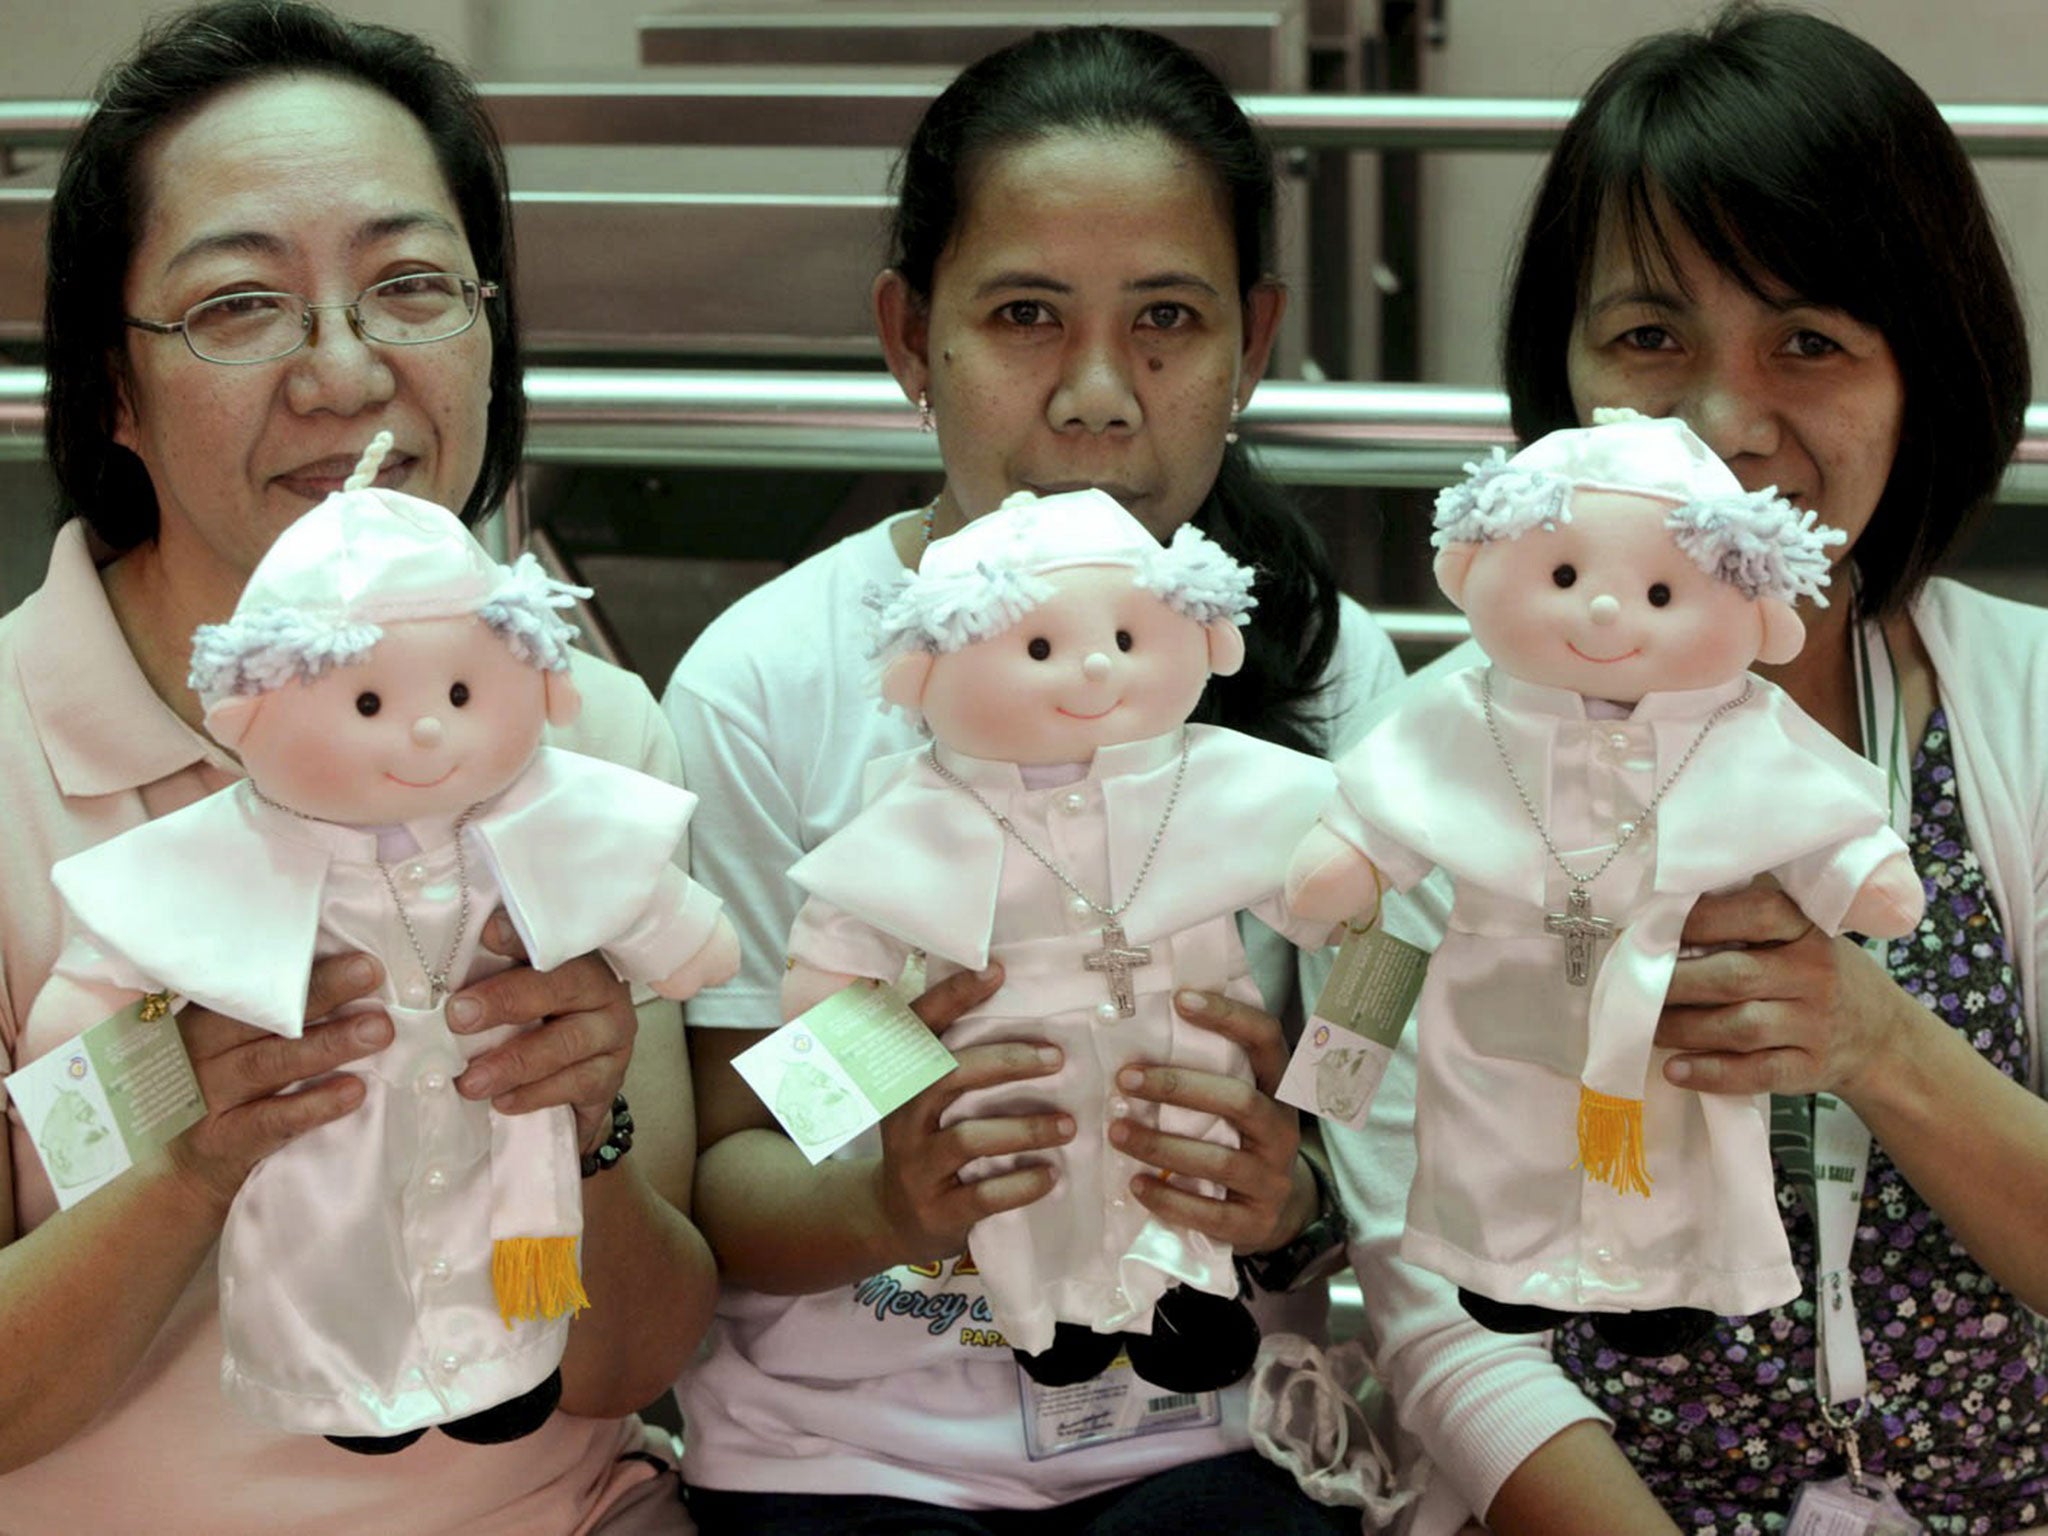 Filipino devotees hold limited edition Pope Francis dolls that are sold by the De La Salle University in Manila, Philippines Wednesday, Jan. 14, 2015